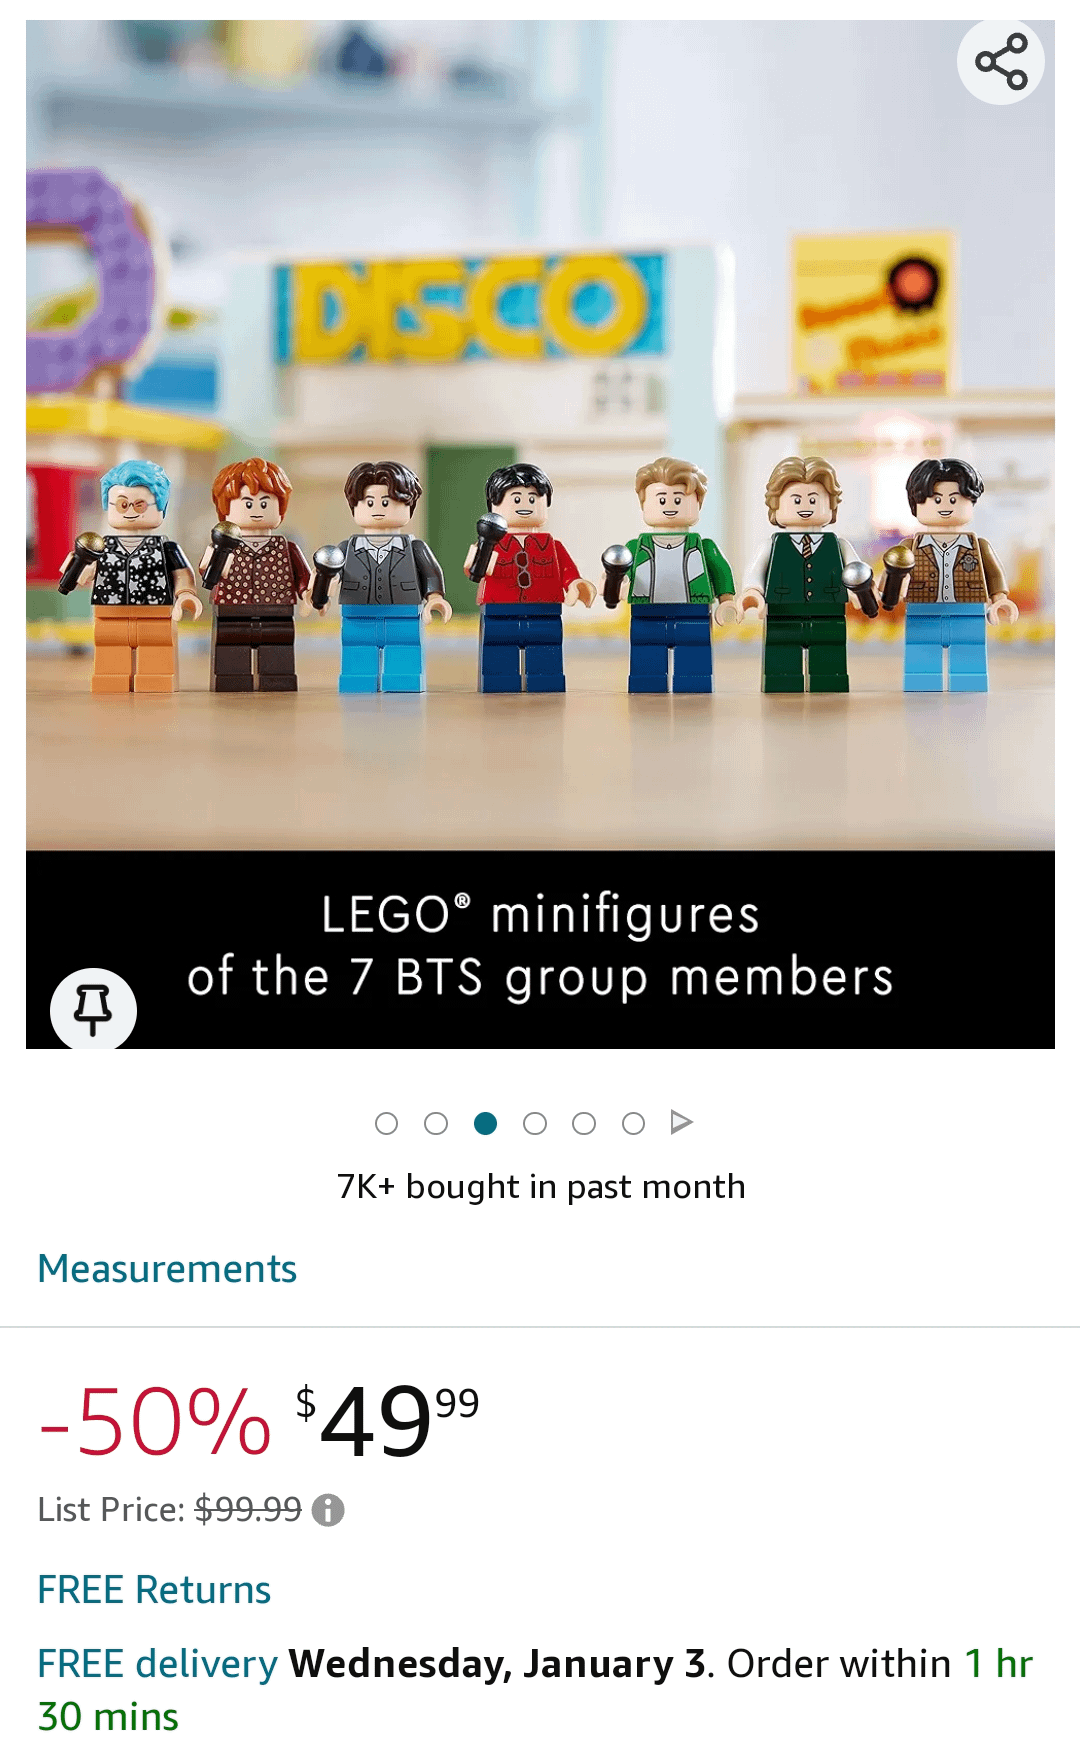 BTS Dynamite Lego set on sale at 50% off on Amazon and Barnes & Noble